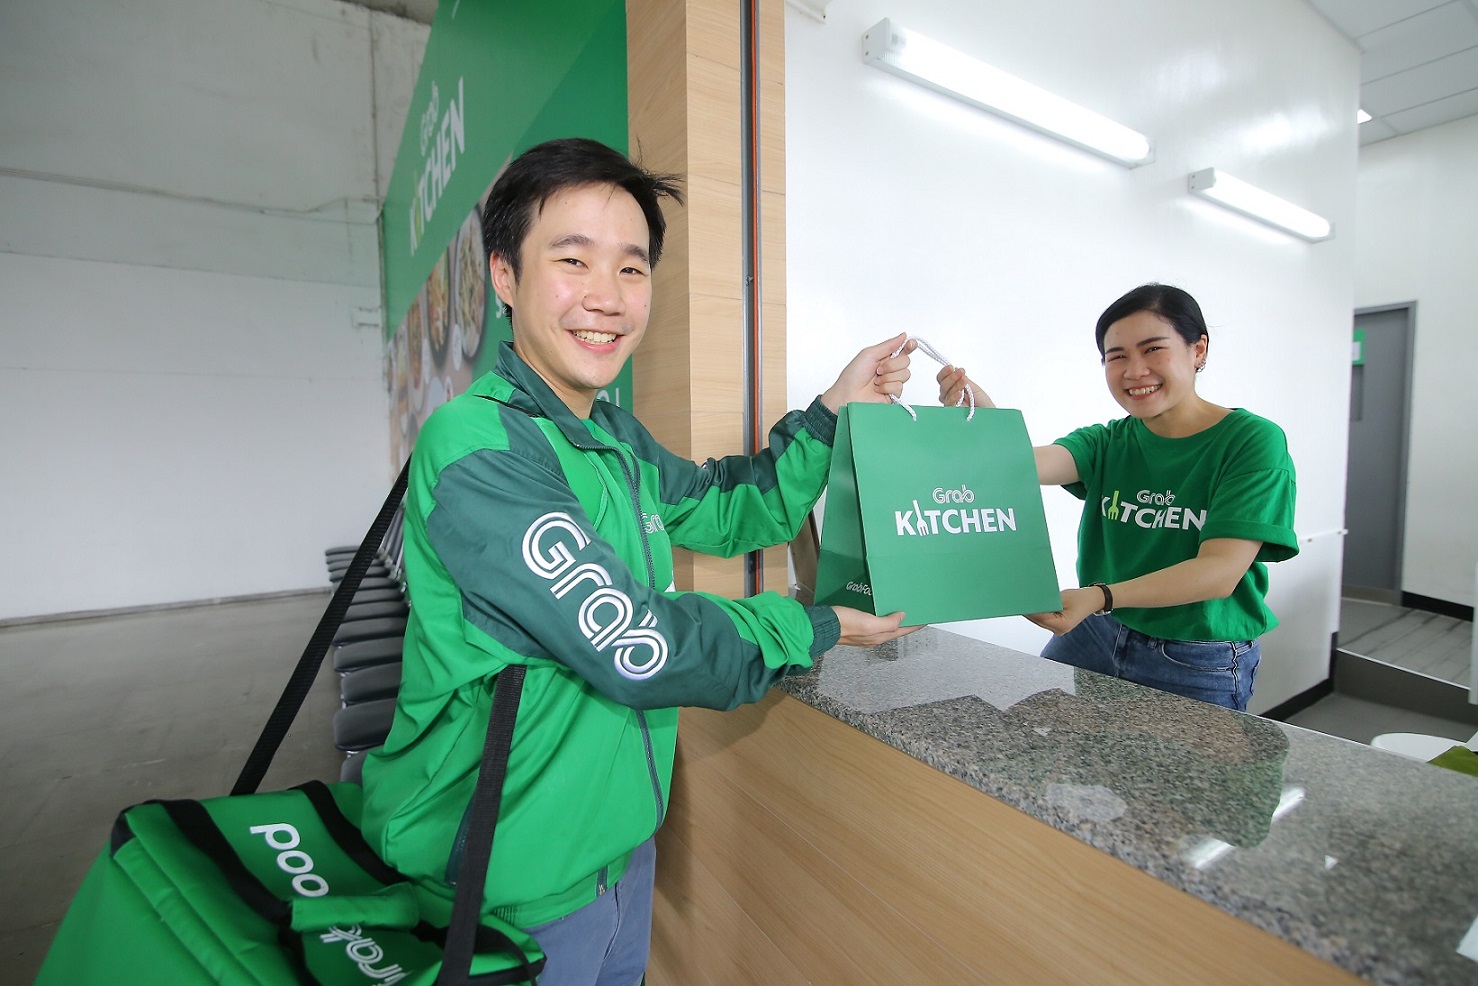 Grab Introduces The First Grabkitchen To Bangkok To Empower Grabfood Ecosystem Techsauce